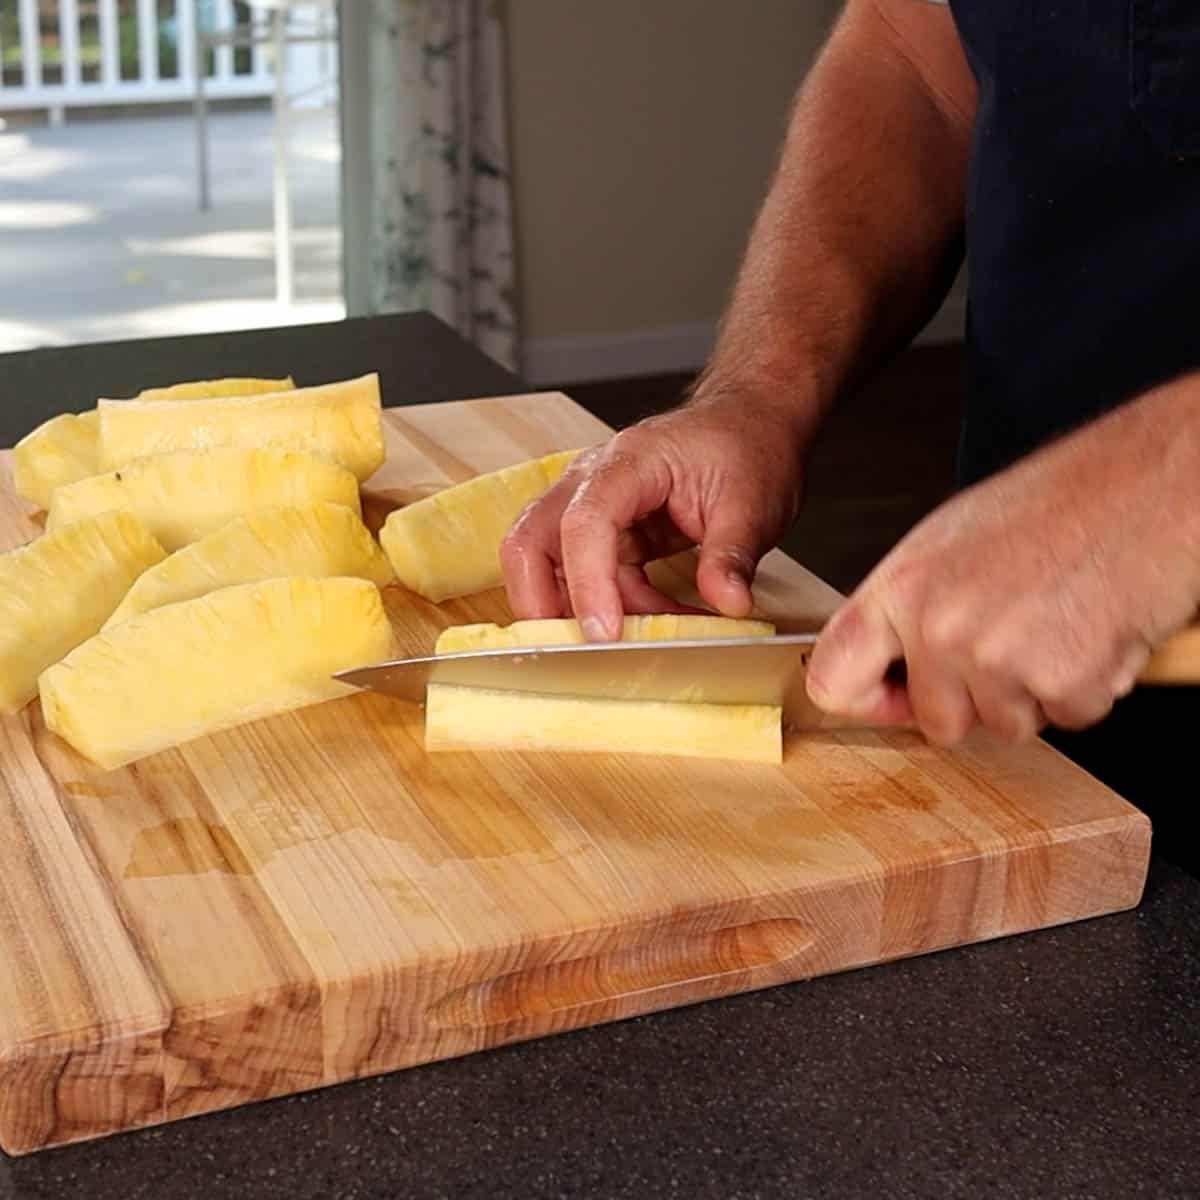 Cutting the core out of the pineapple